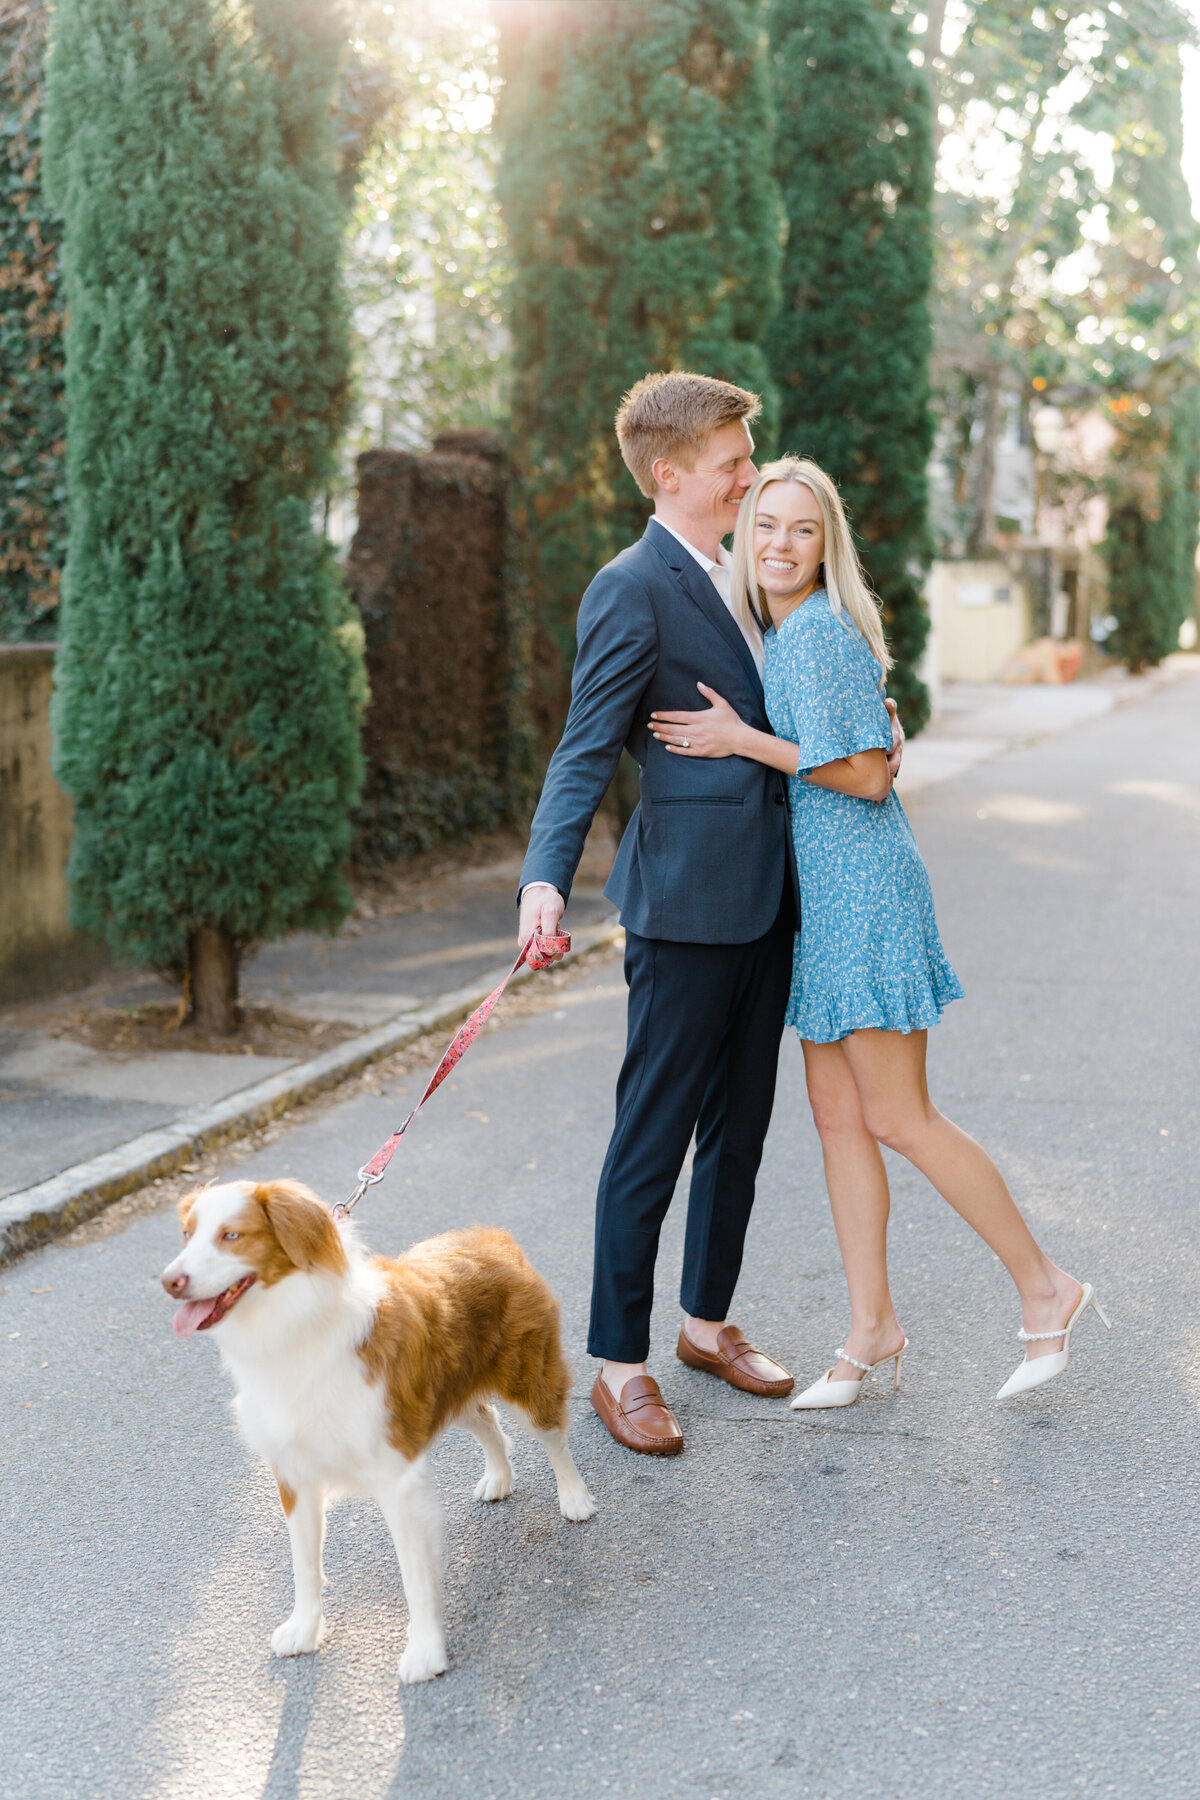 This couple brought their australian shepherd dog to their sunshine filled engagement session in downtown Charleston.